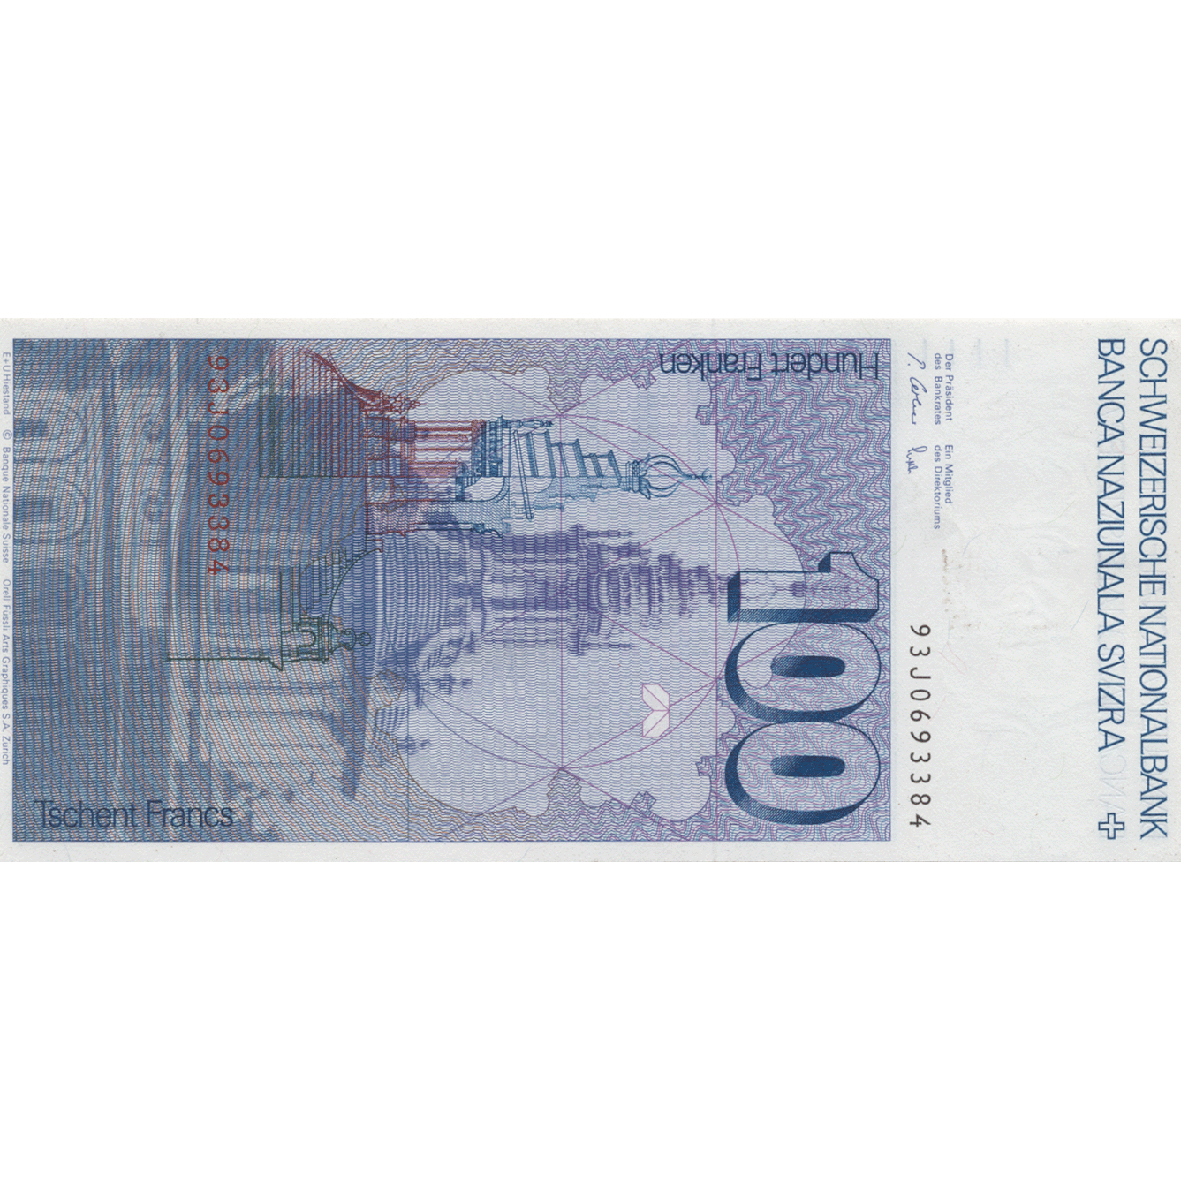 Swiss Confederation, 100 Francs (6th Banknote Series, in Circulation 1976-2000) (reverse)